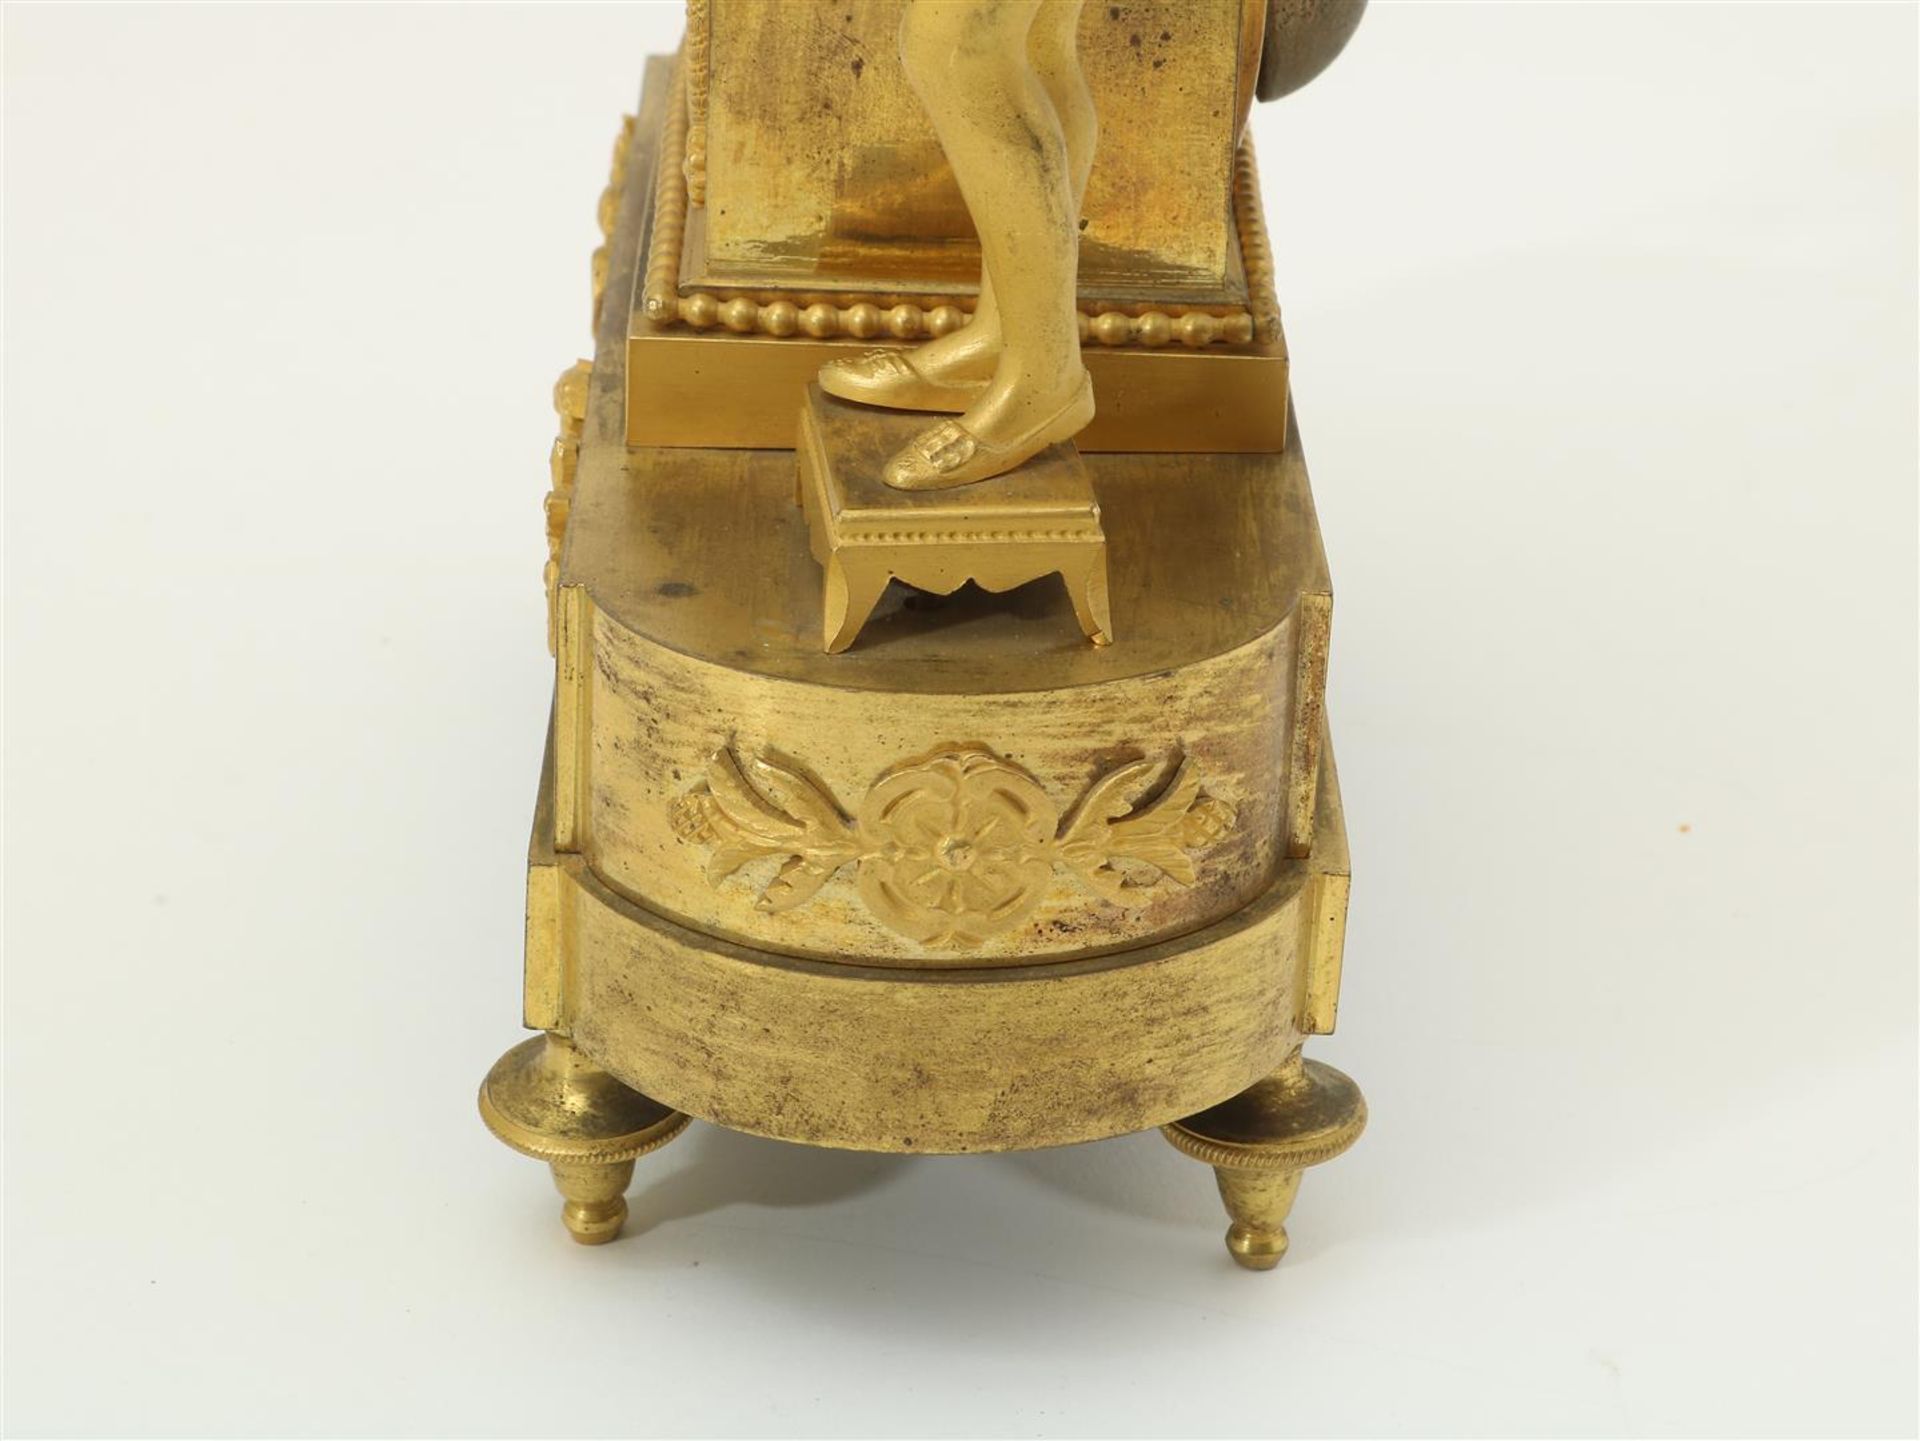 Fire-gilt Empire mantel clock with musician and sheet music, with running and percussion - Image 6 of 7